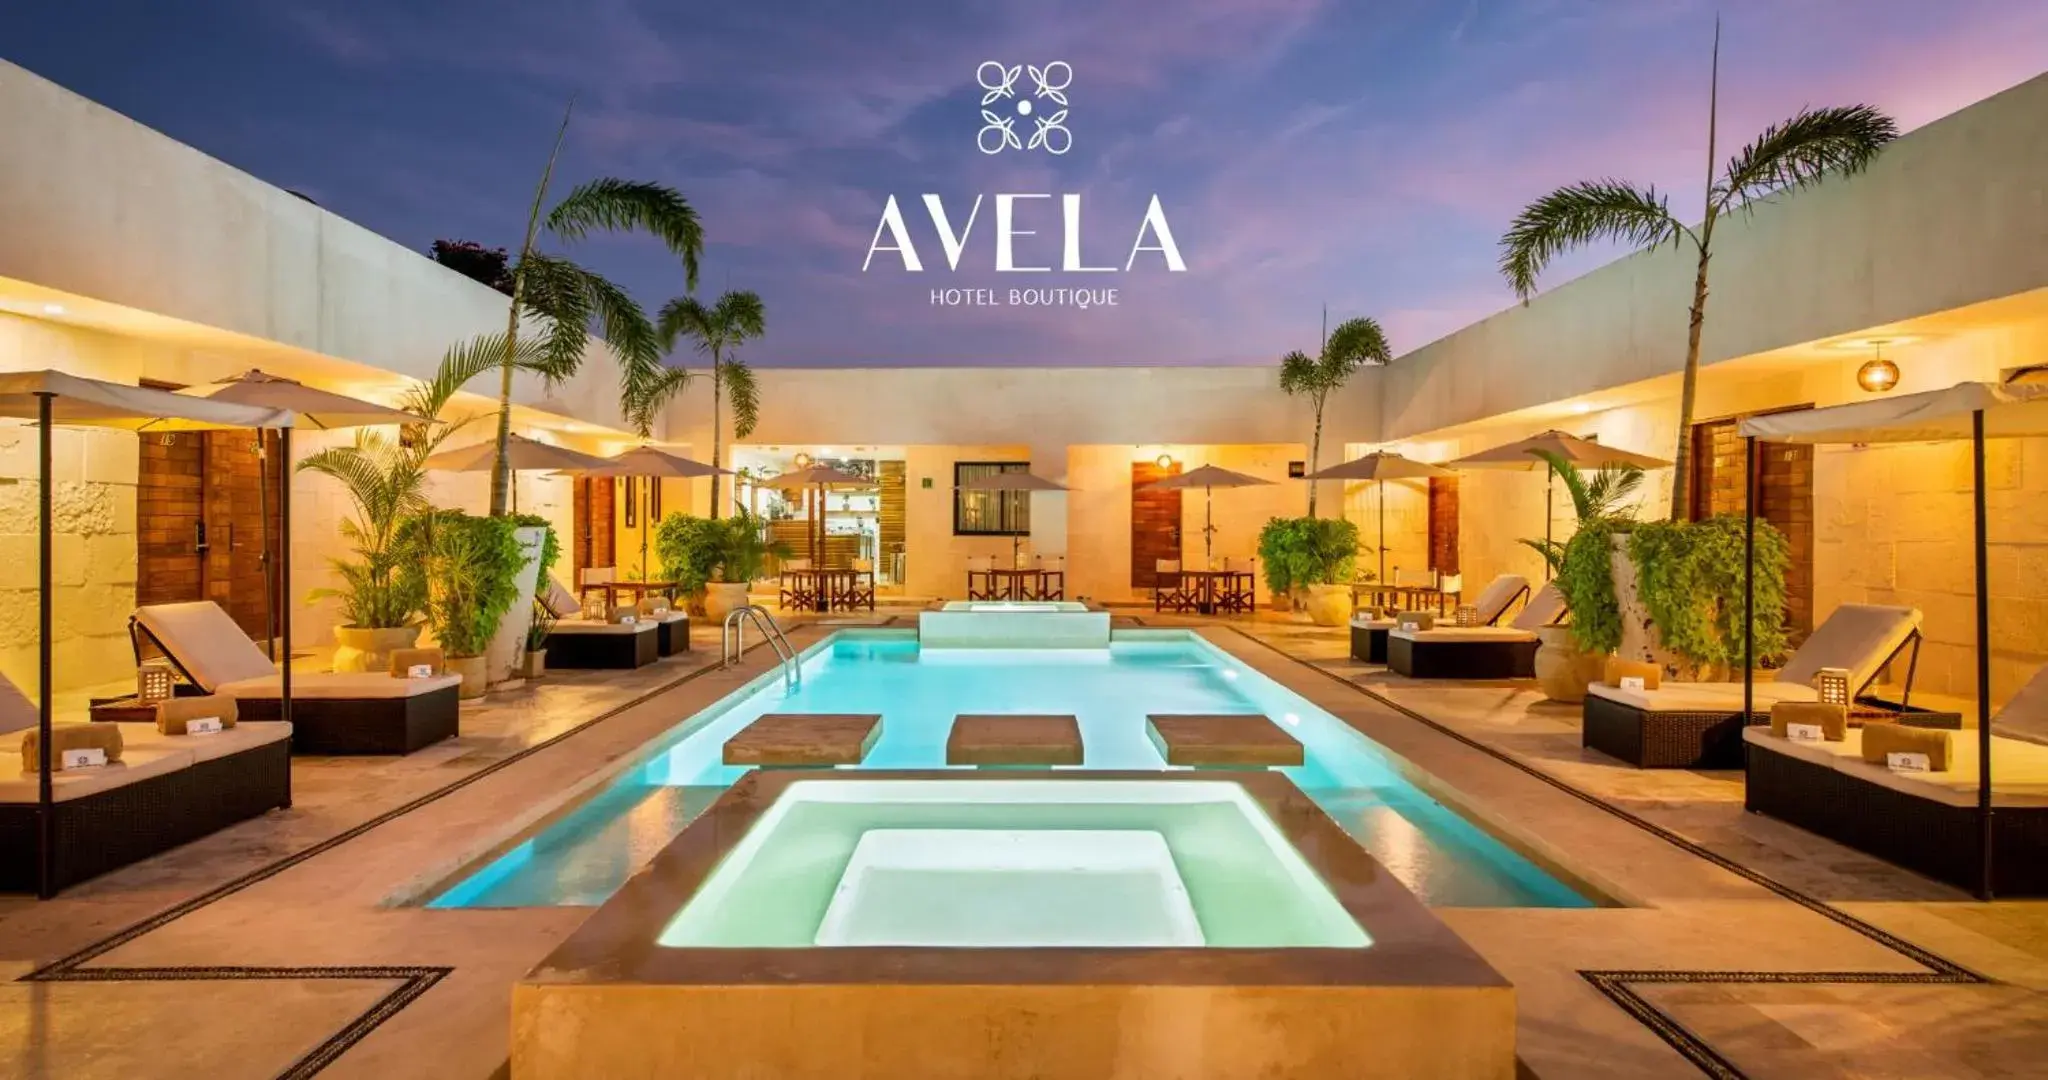 Property building in Avela Boutique Hotel